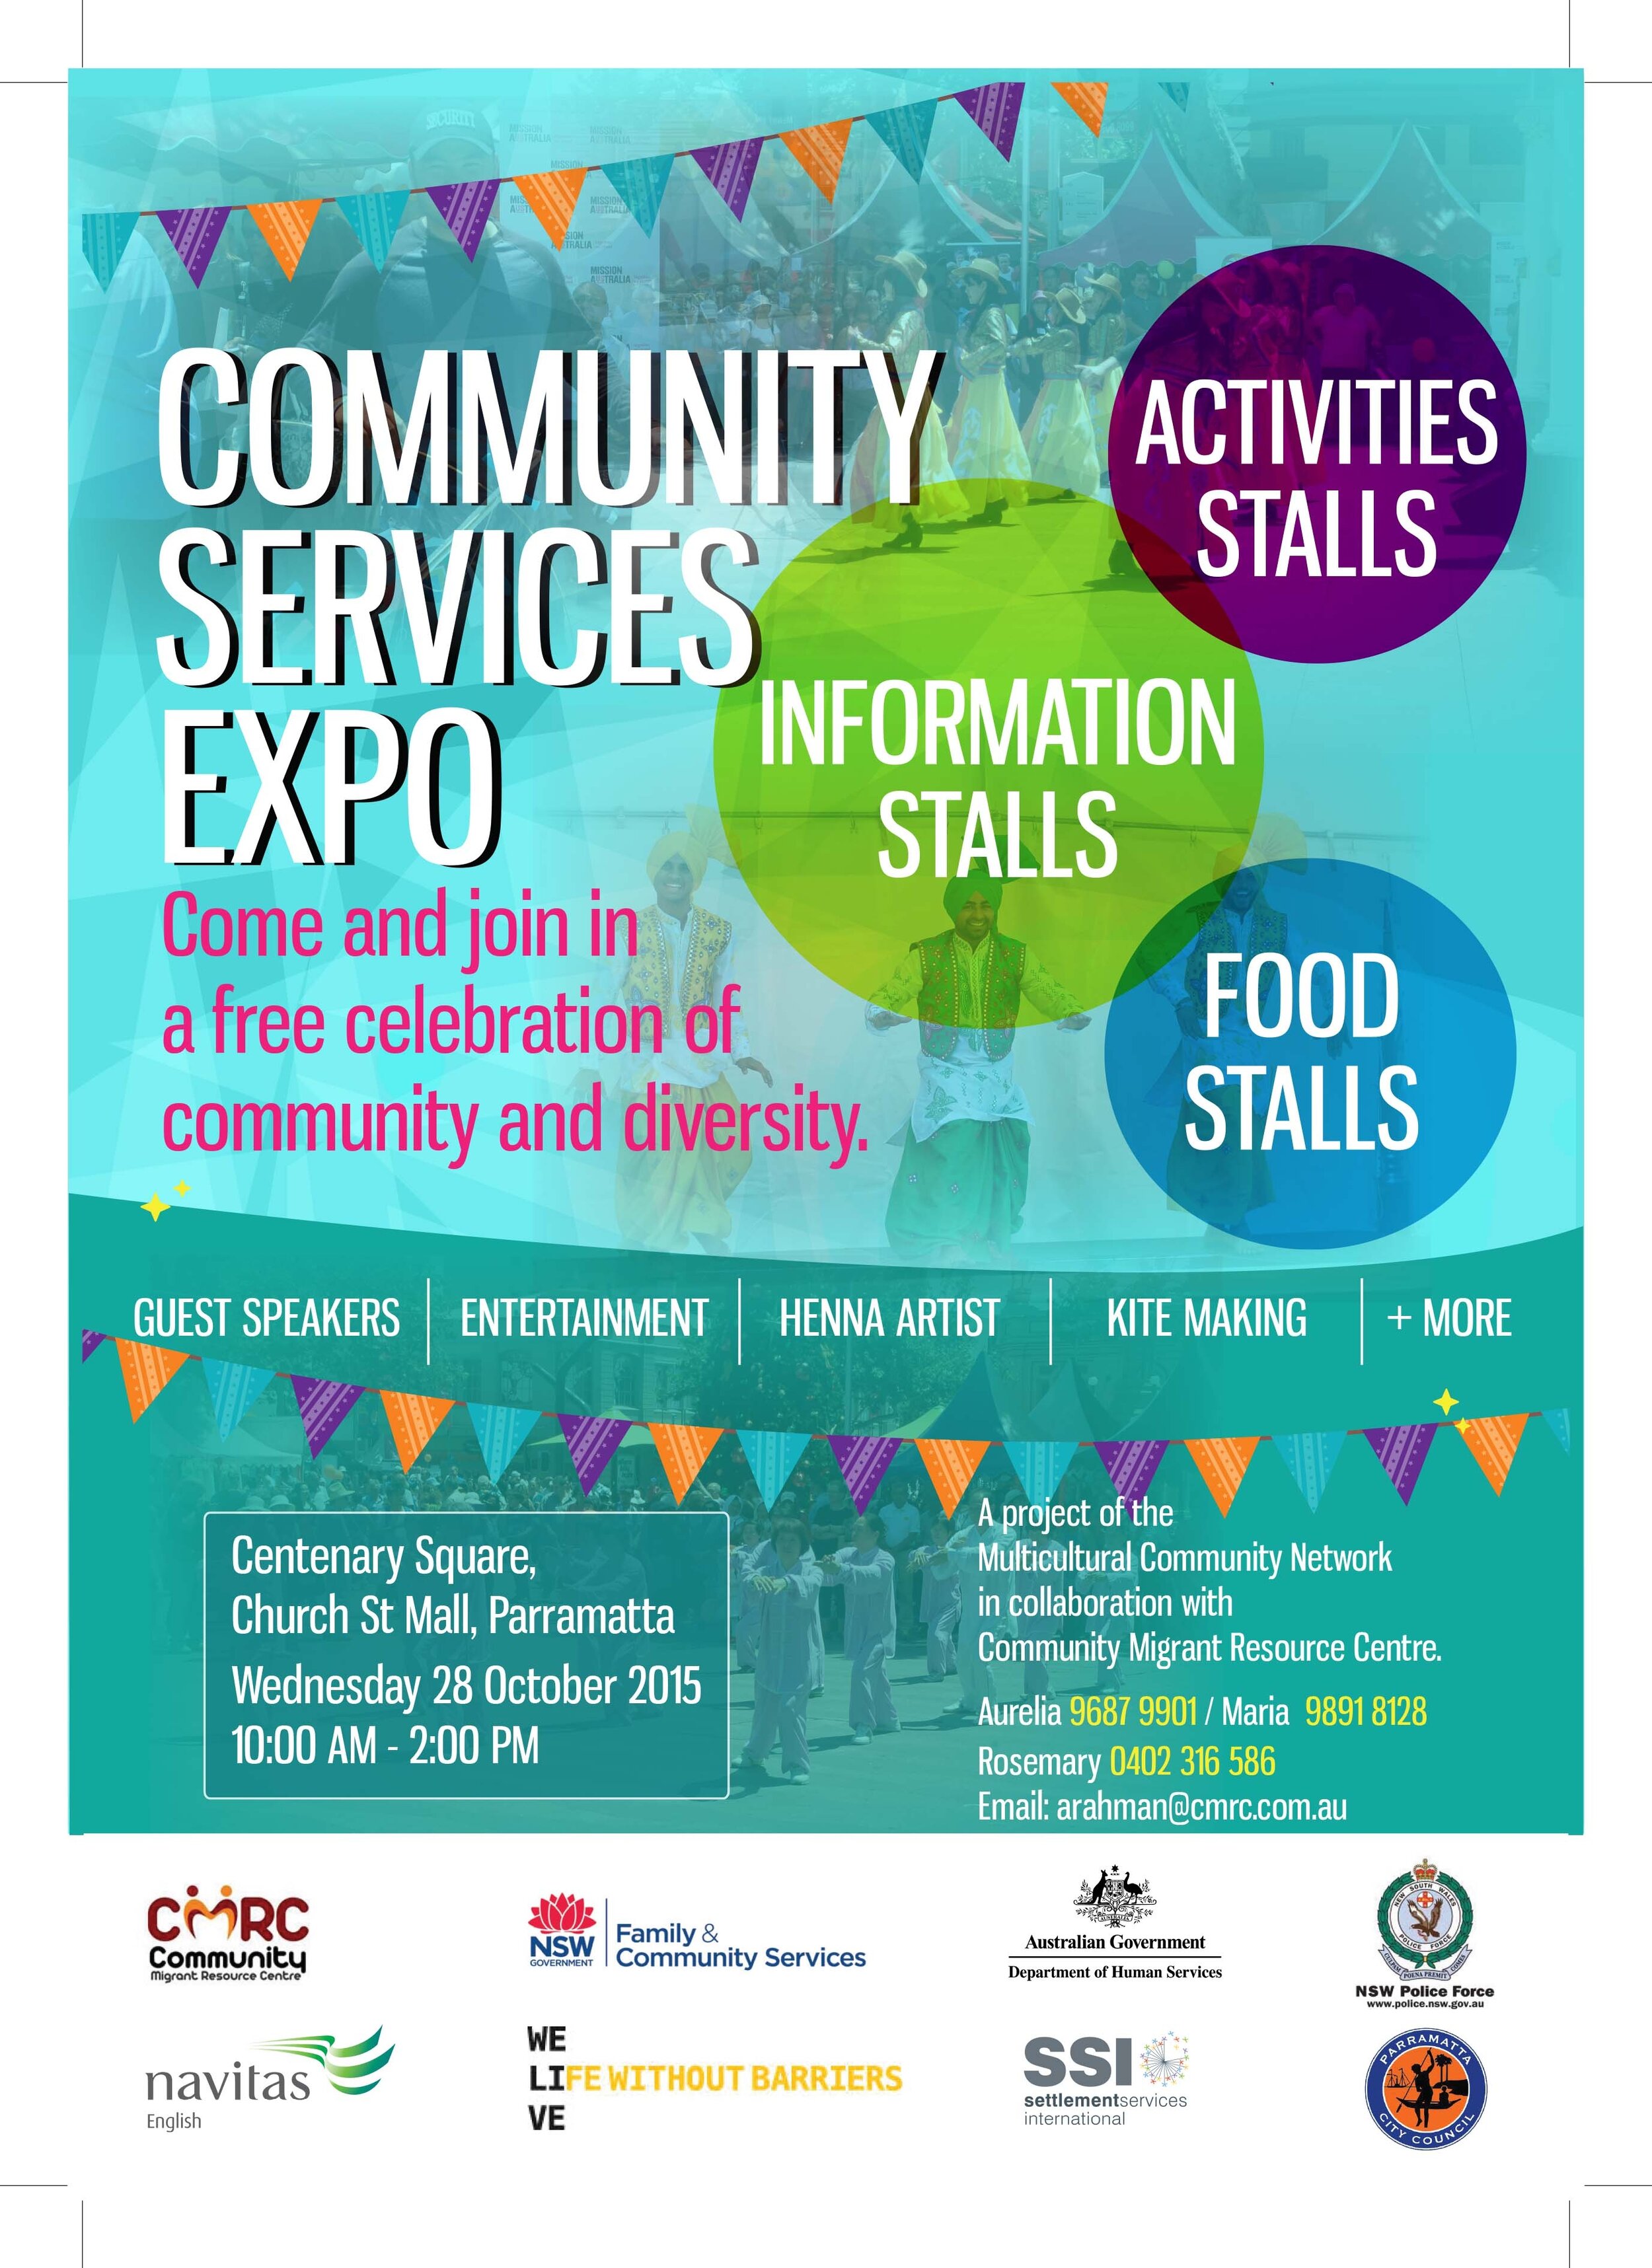 Community Services Expo 2015 Flyer - final (1).JPG